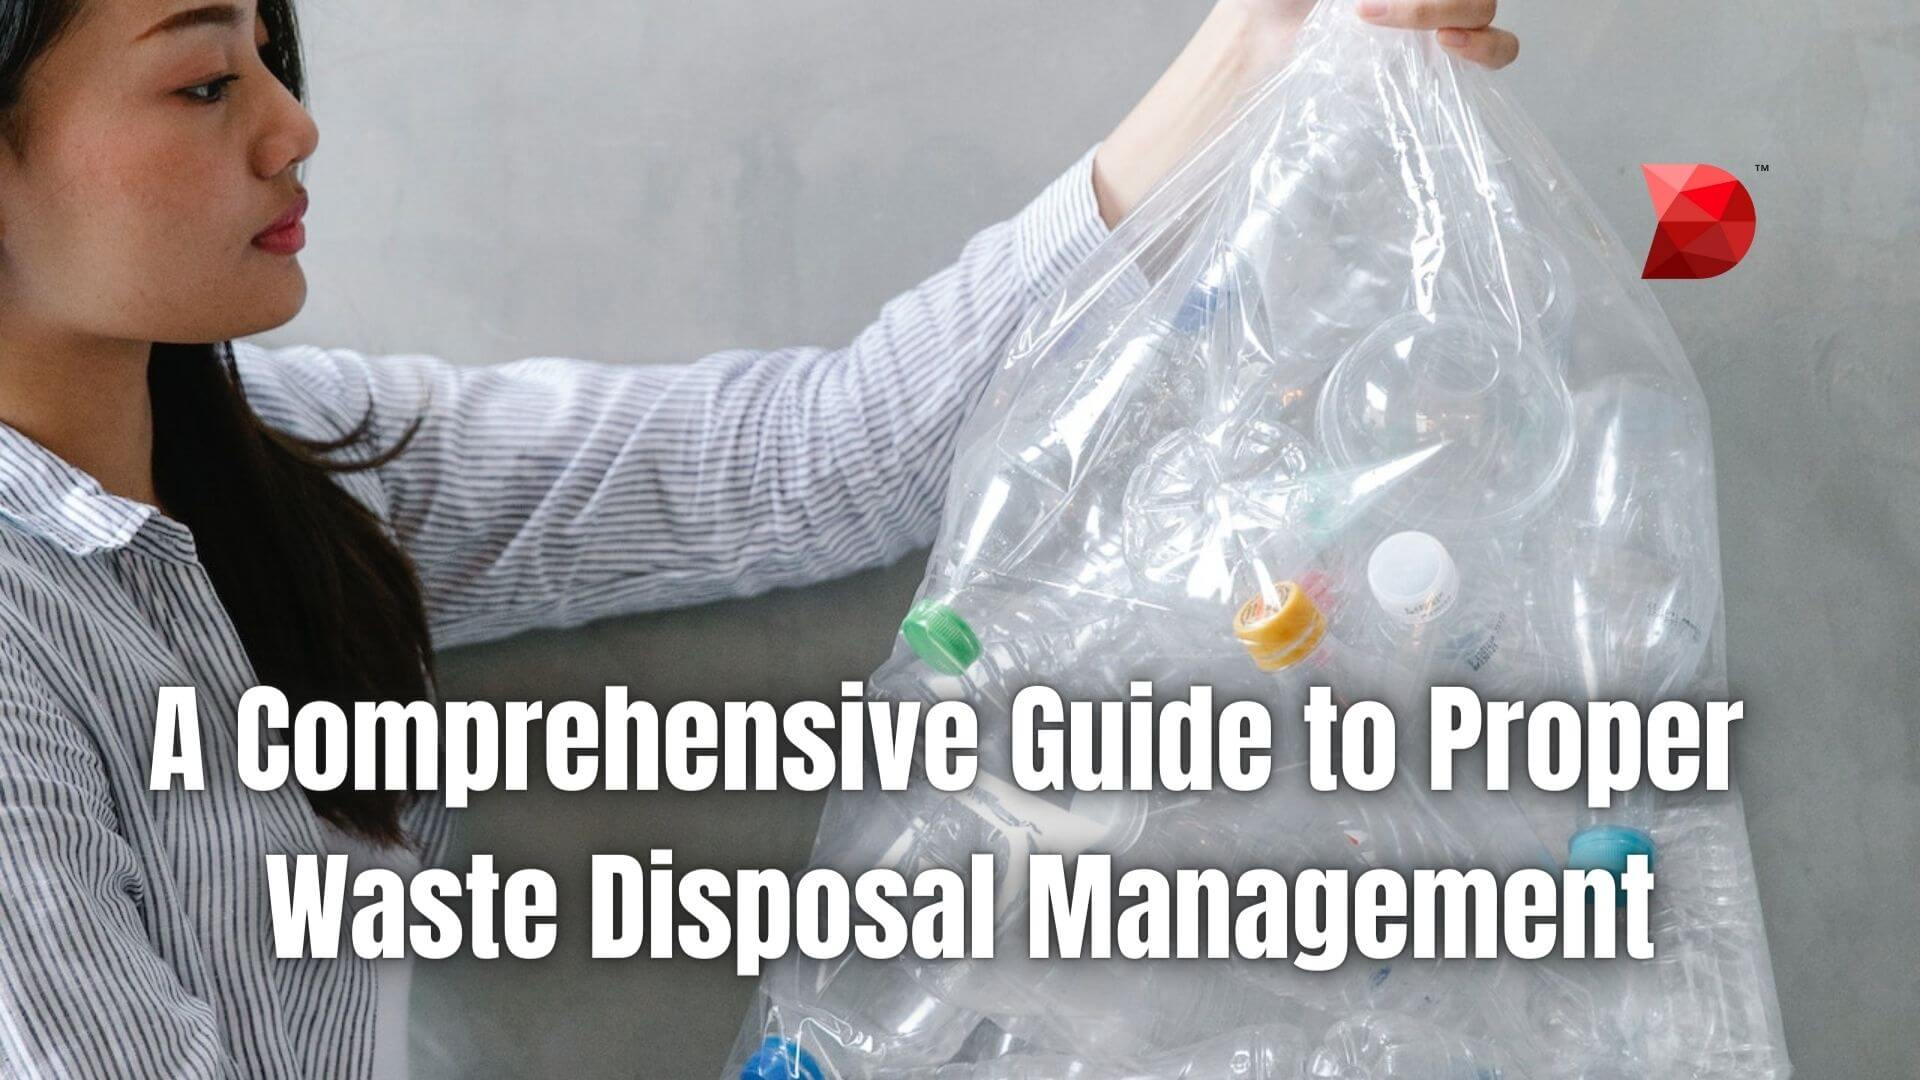 A Comprehensive Guide to Proper Waste Disposal Management